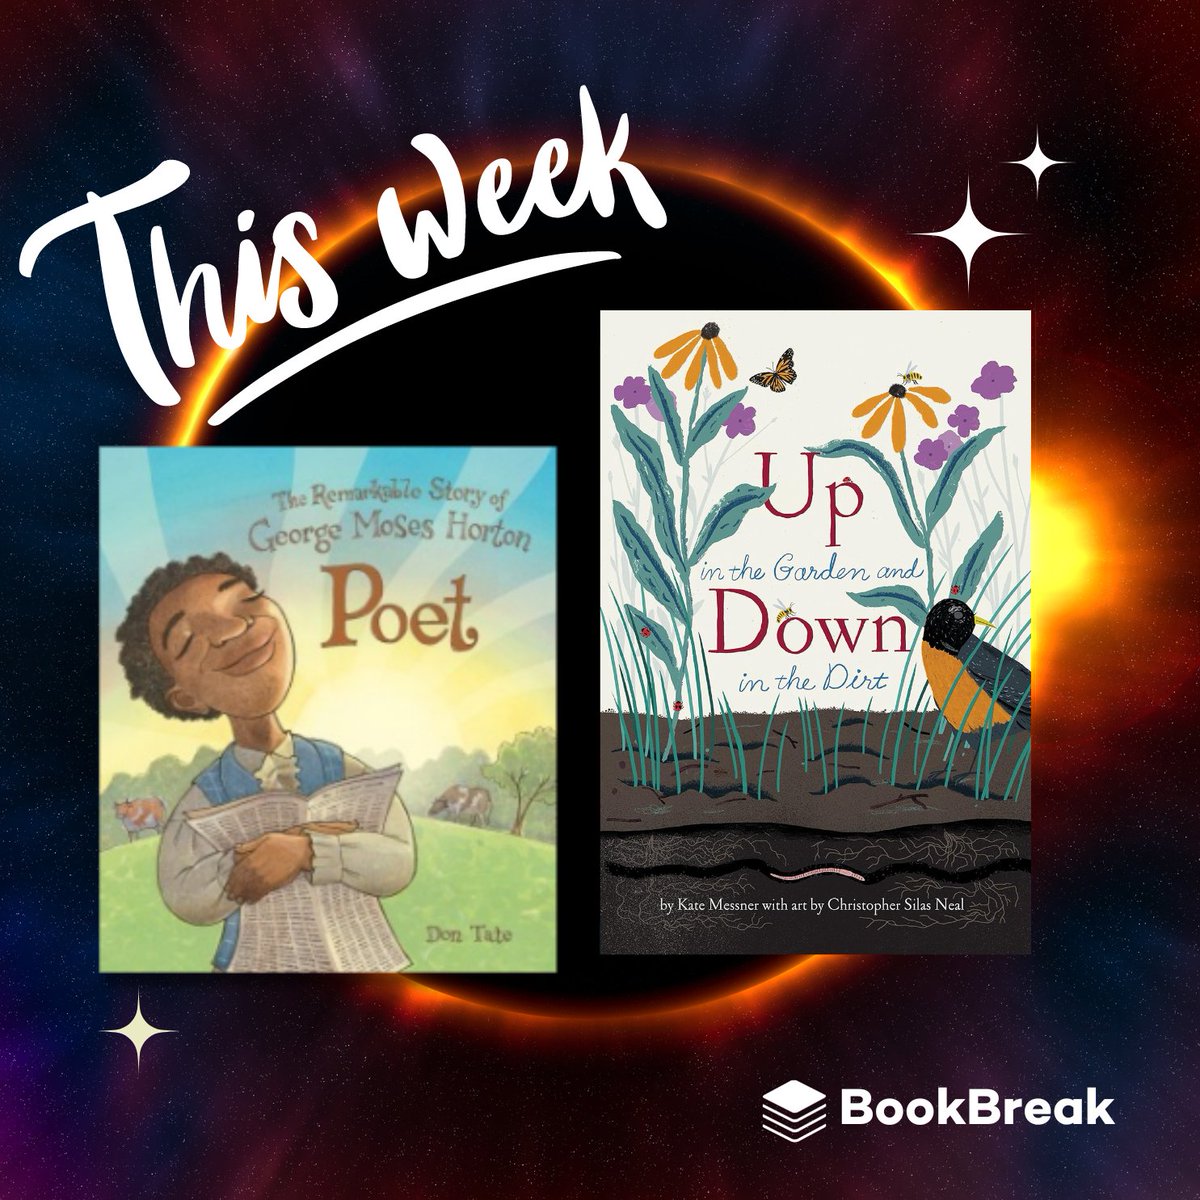 We know the big event this week is the eclipse on Monday, but we also have two amazing authors at BookBreak this week! @Devas_T will be talking with upper elementary and @KateMessner for your younger students. Will we see you there?